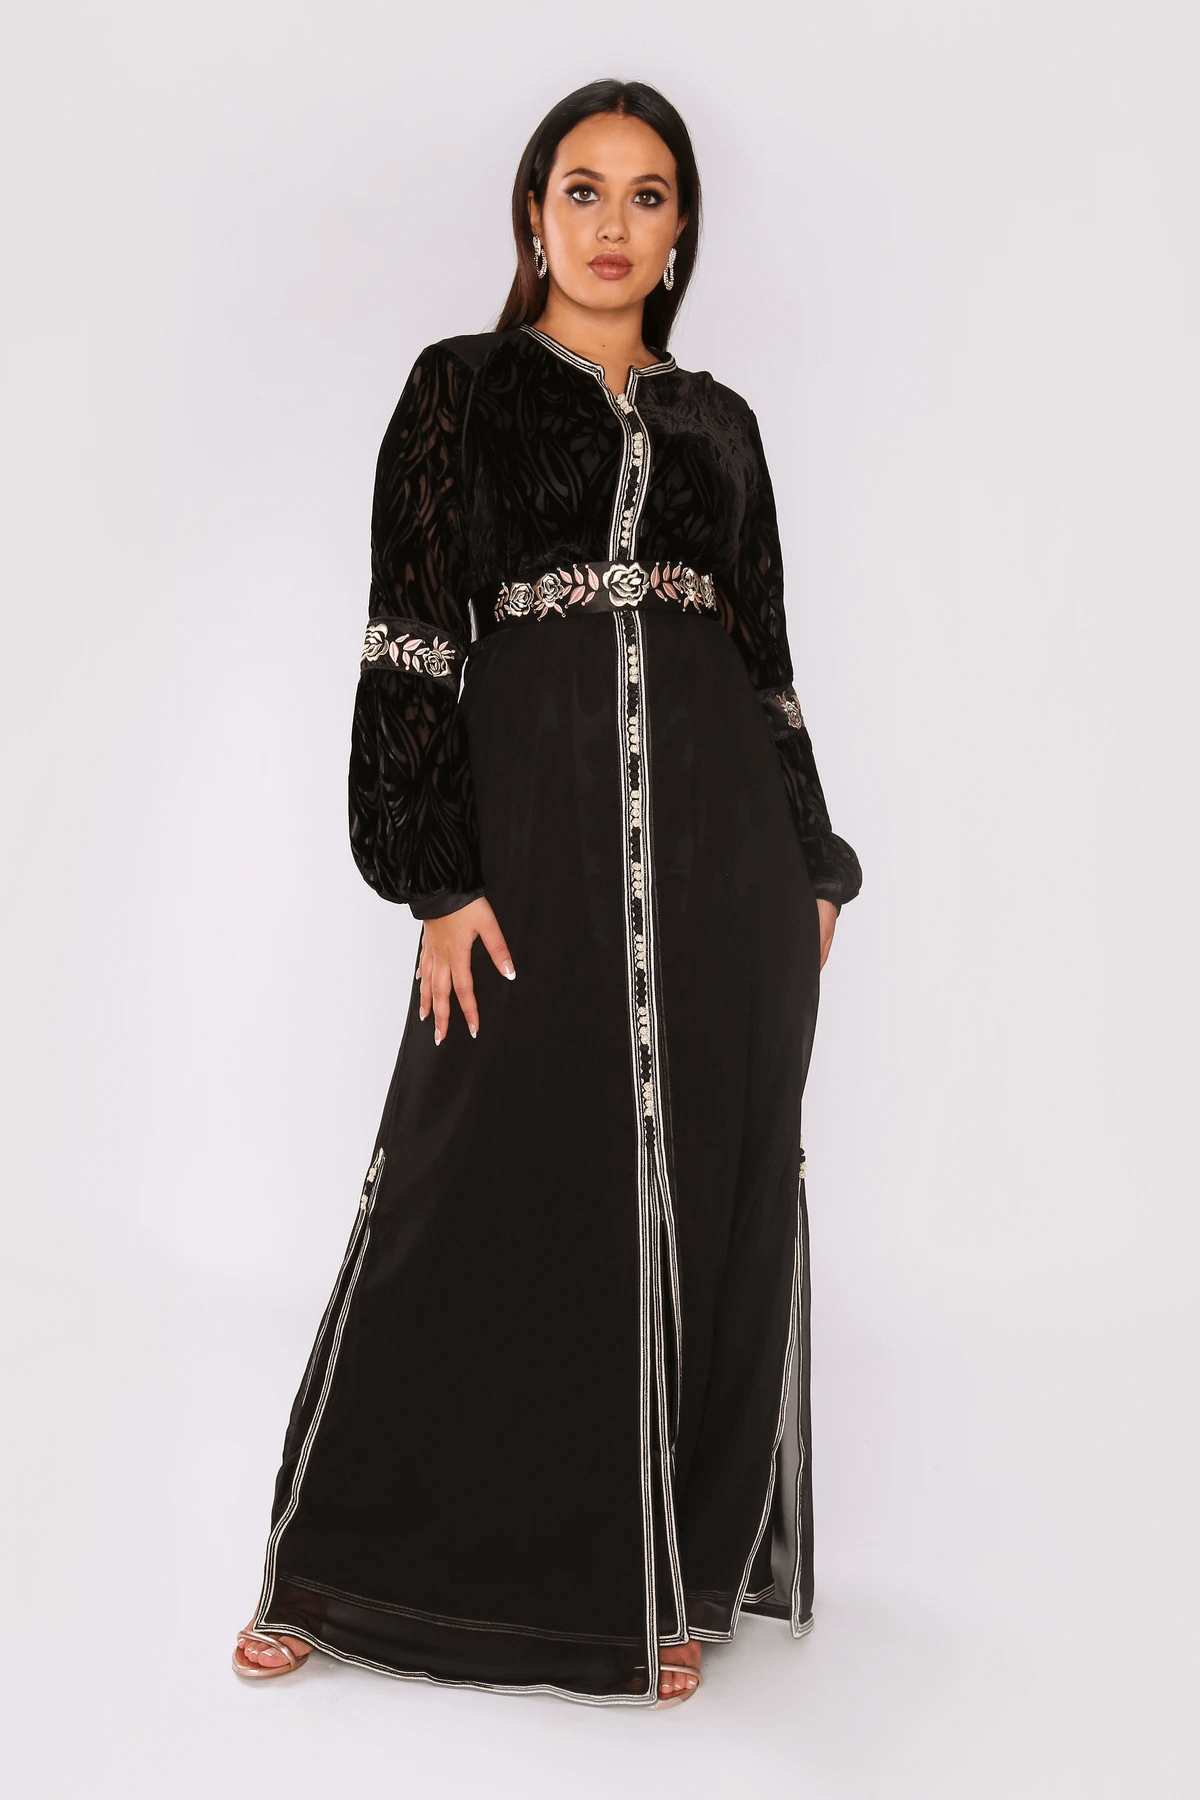 Lebssa Edwige Special Occasion Formal Long Dress with Sheer Velour Sleeves and Belt in Black